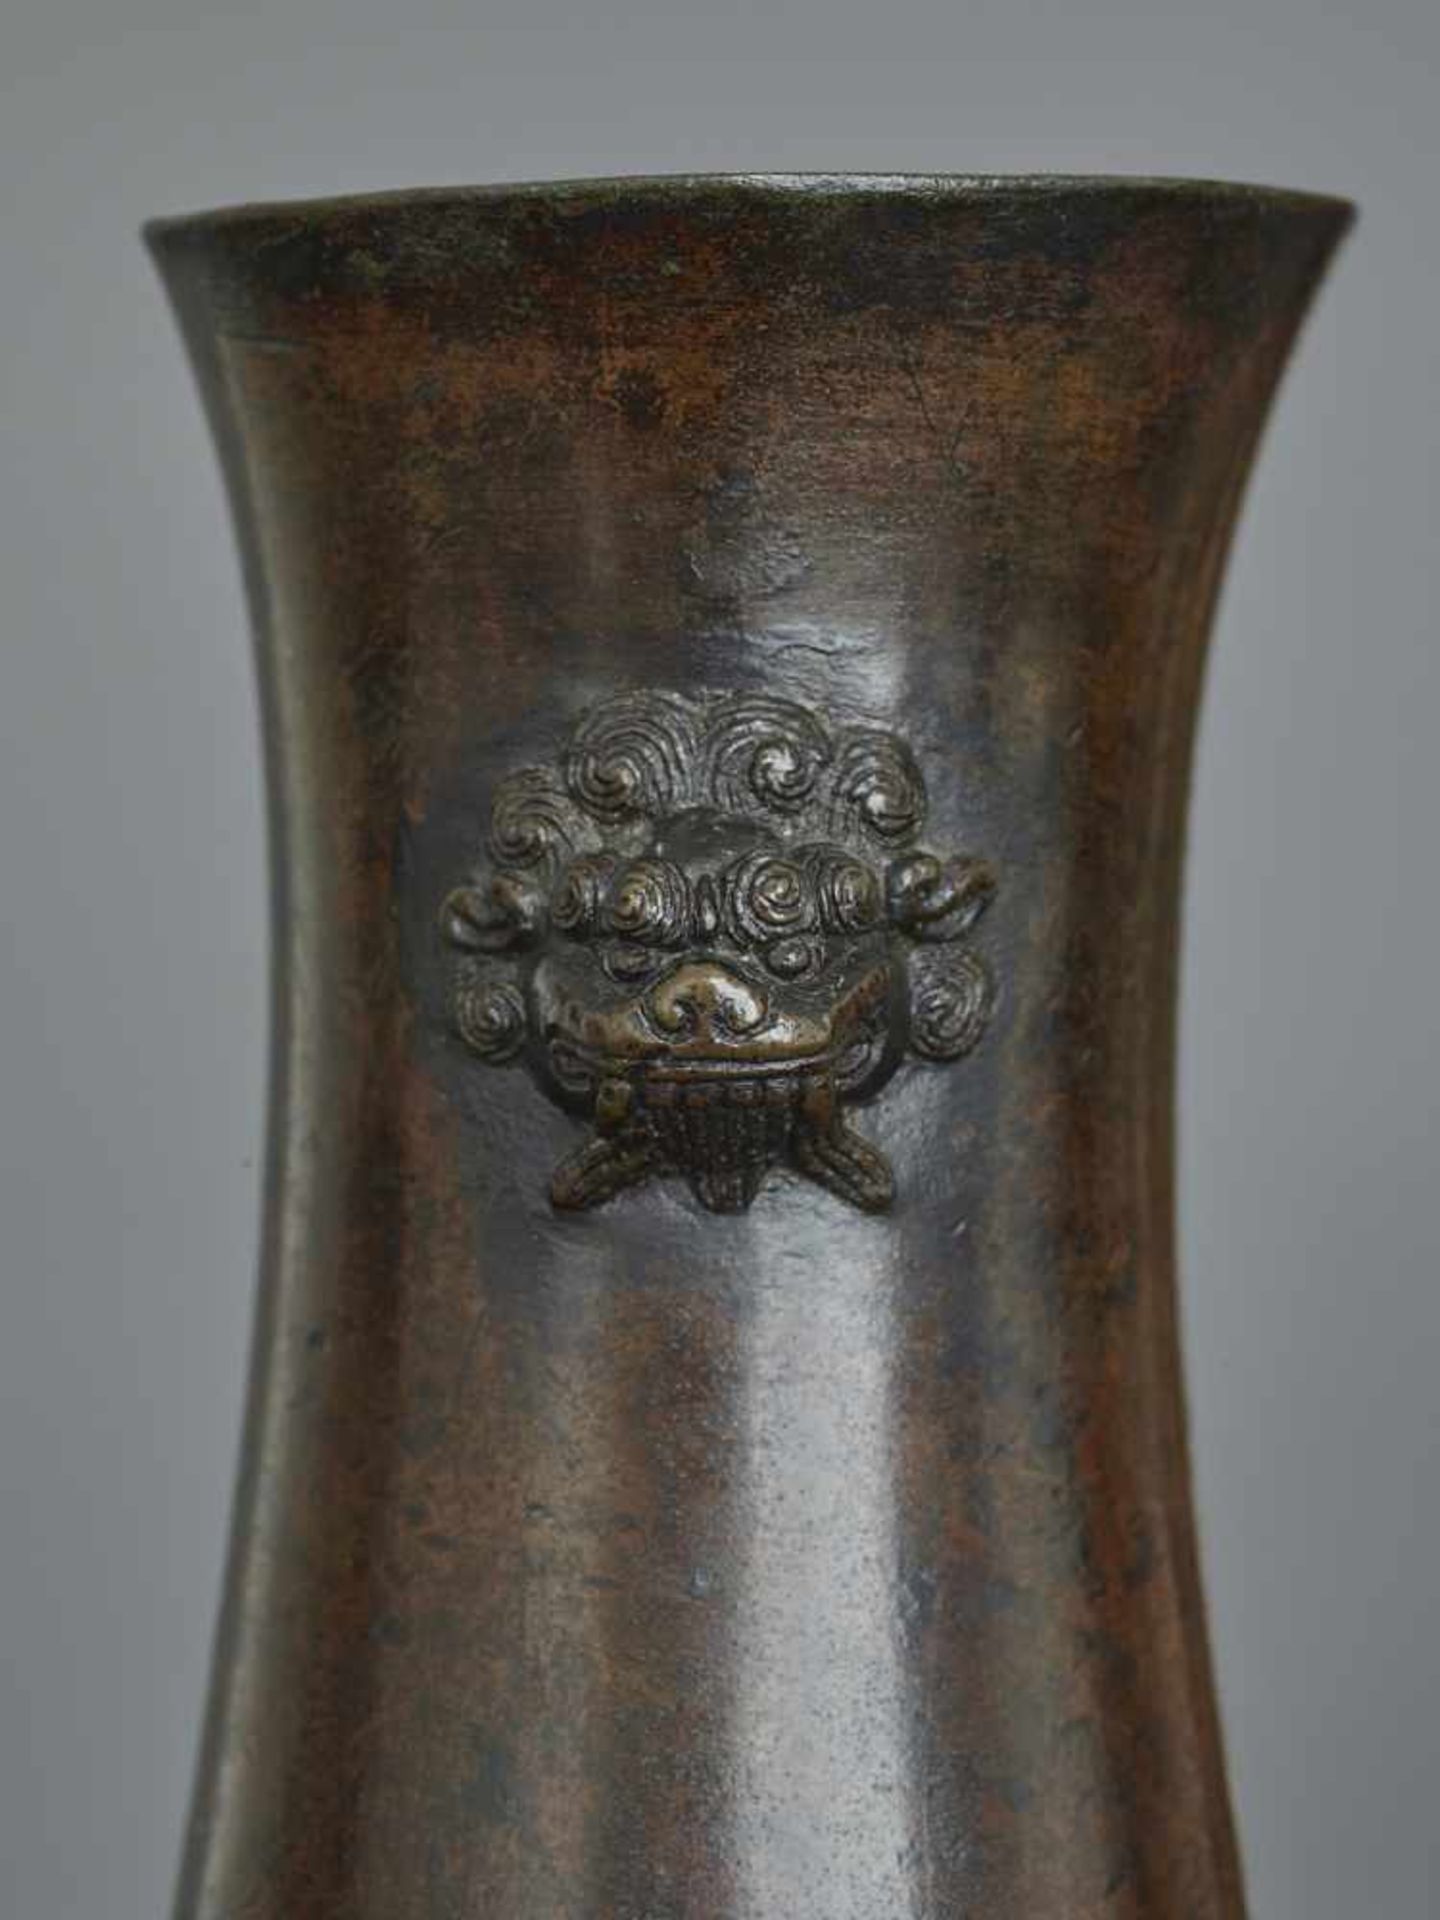 A FINE LION HEAD BRONZE VASE, MING China, 1368-1644. The slender vase with flaring foot rim and - Image 9 of 10